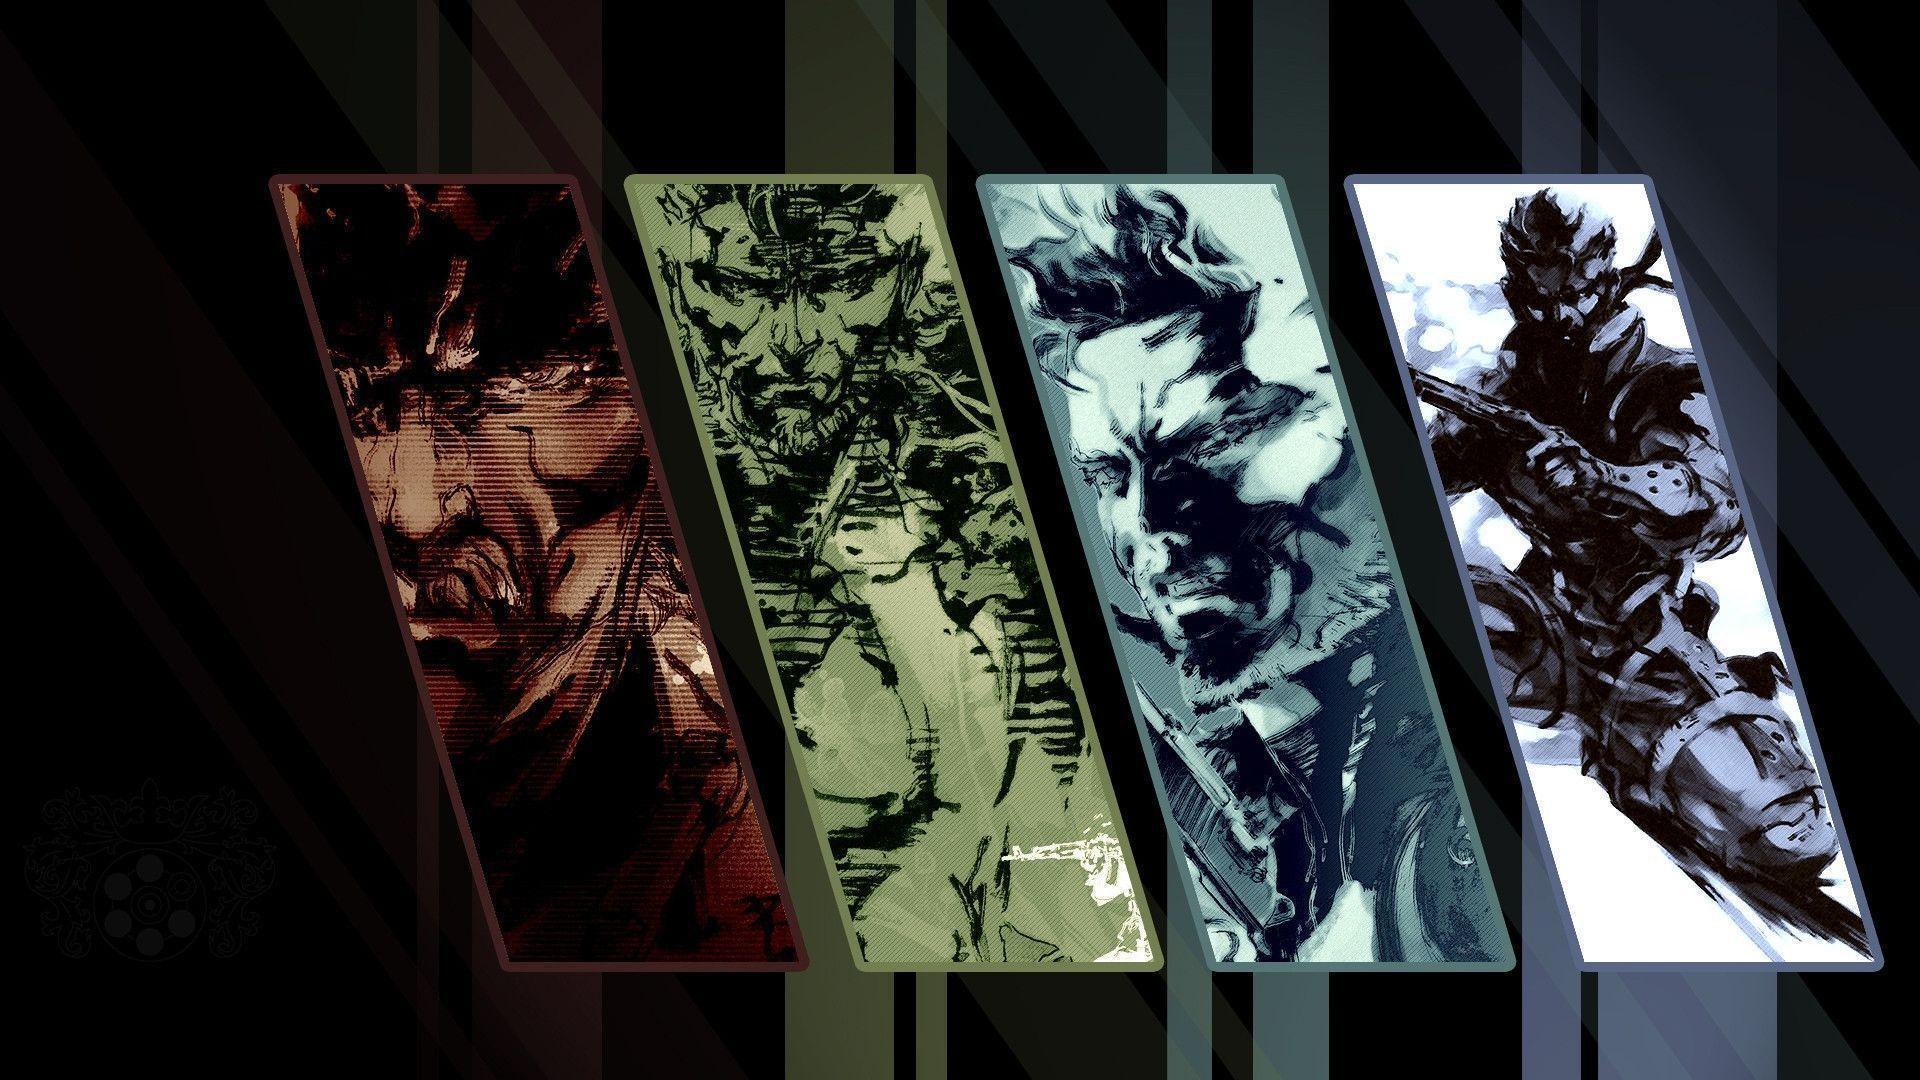 Another of my favourite MGS Wallpaper